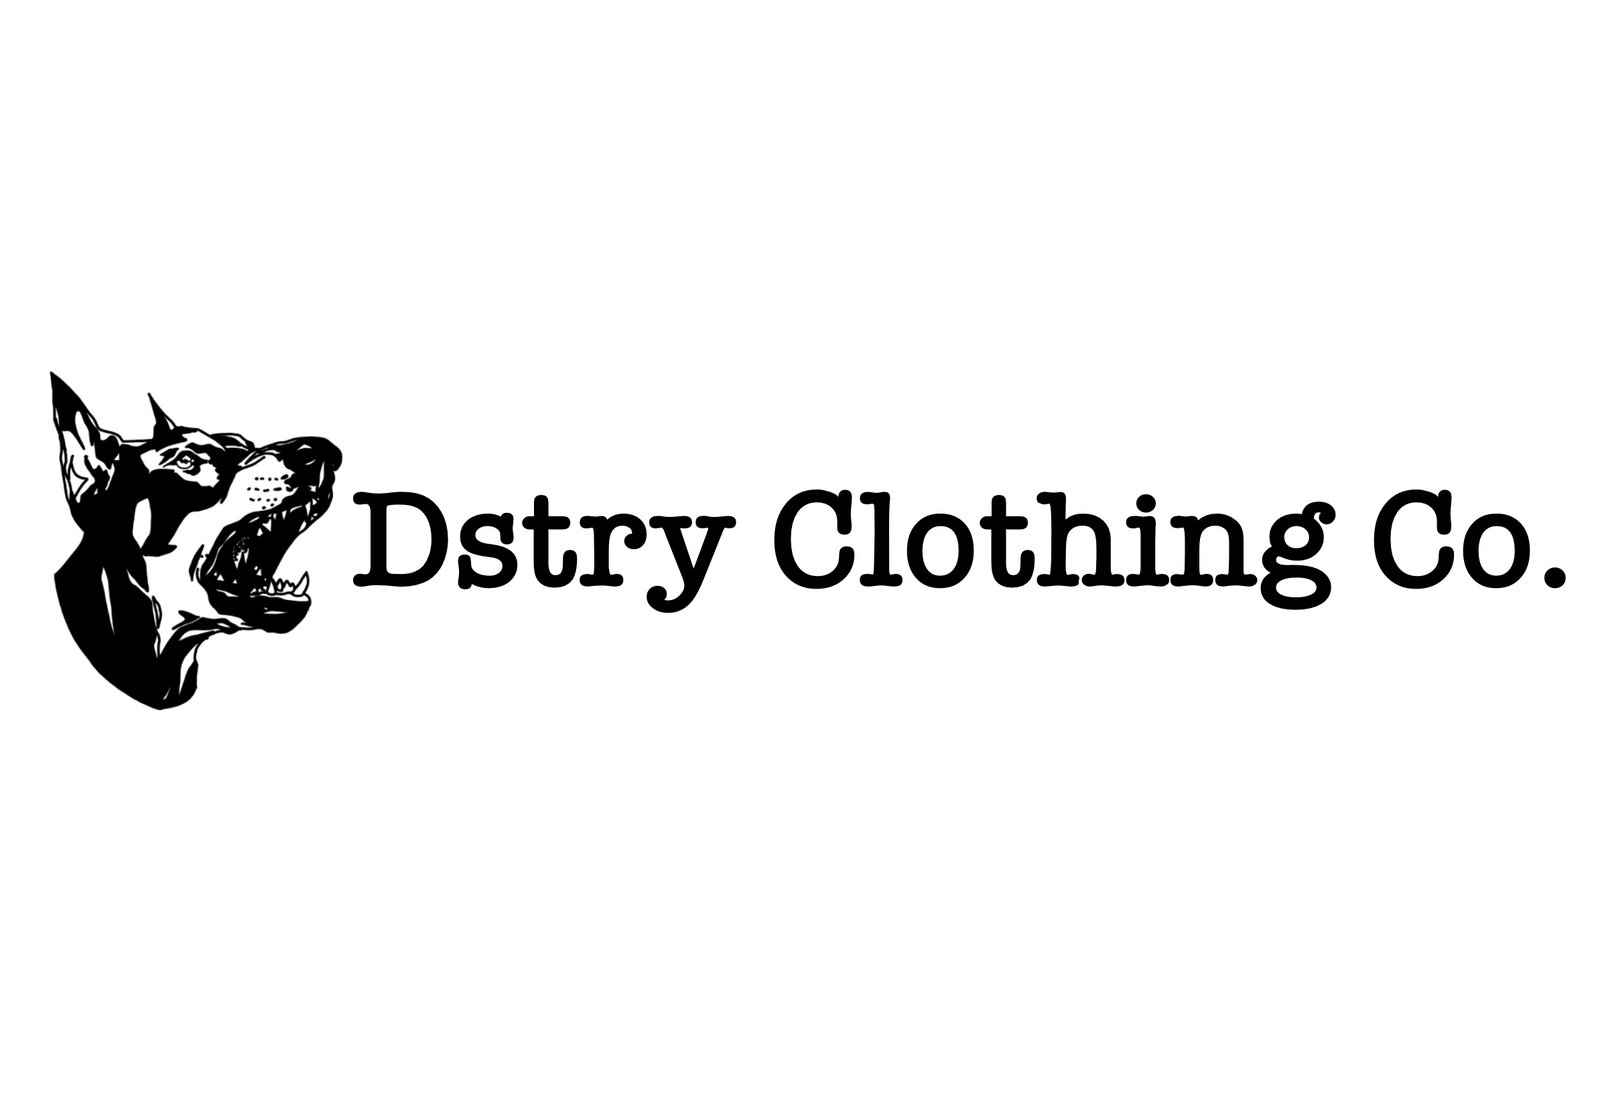 DSTRY CLOTHING CO.